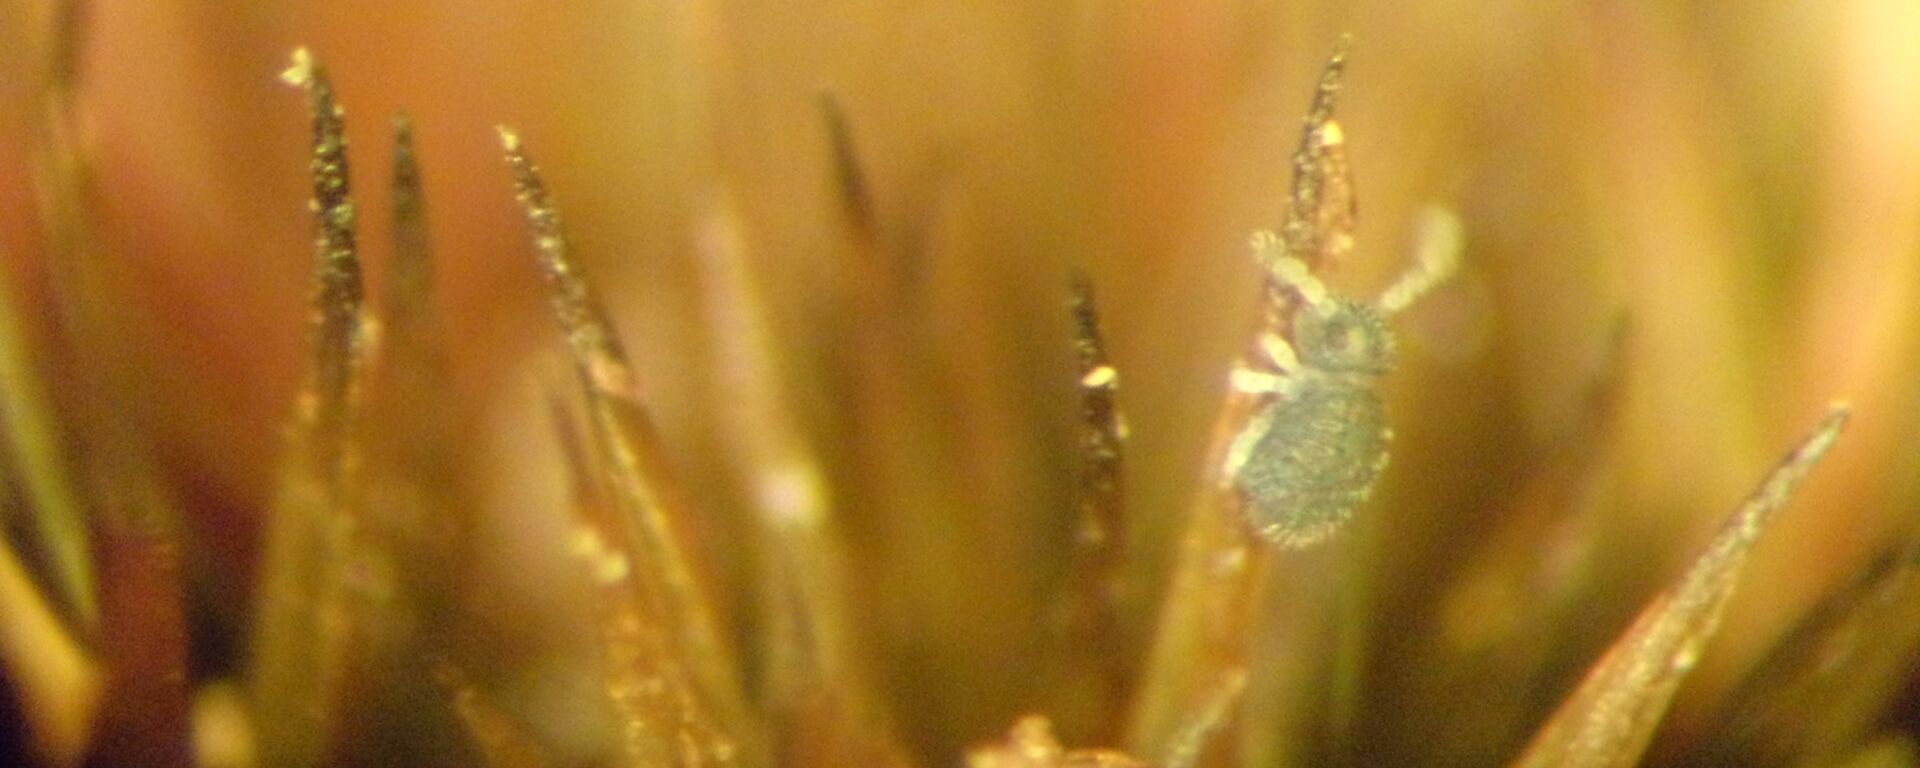 F1 — tiny mite on a blade of moss. The enlarged microscopic mite can be seen in some detail showing his antennae, one eye and three of its legs. You can make out some hair-like features on it’s carpace